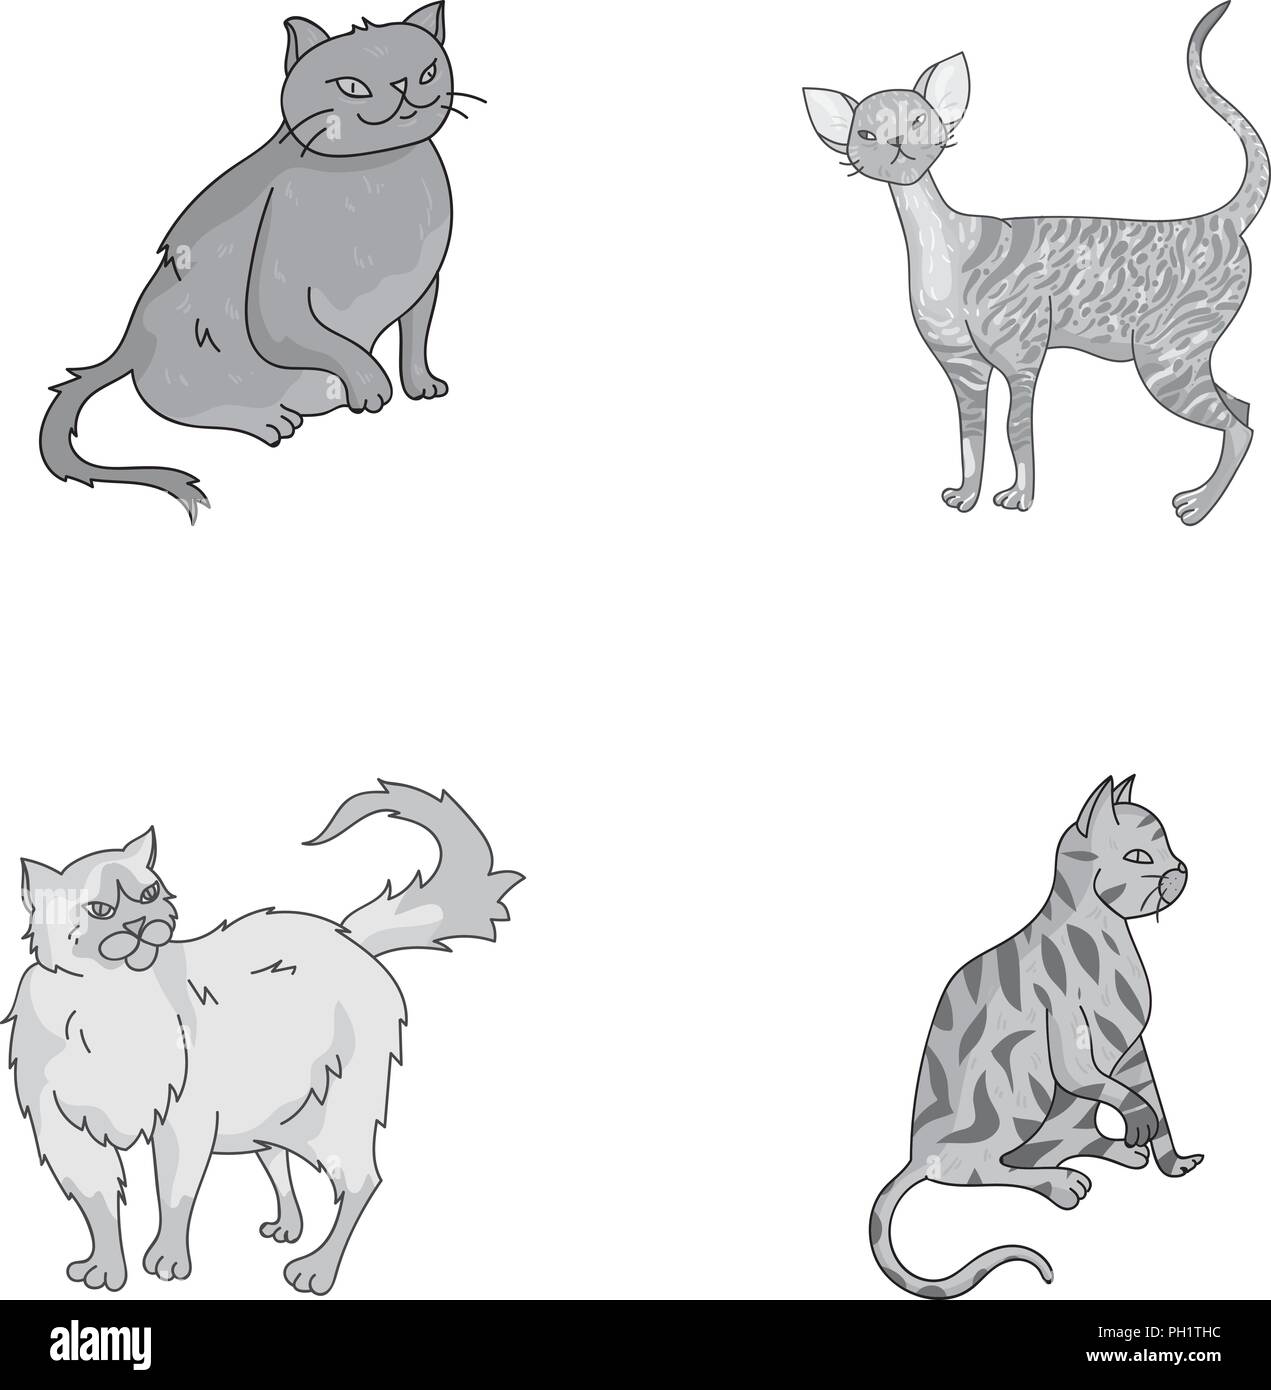 American Animals Breeds Cat Chocolate Collection Cornish Cute Friend Home Icon Illustration Isolated Logo Monochrome Nice Other Persian Rex Set Shorthair Sign Symbol Types Vector Web York Vector Vectors Stock Vector Image Art Alamy